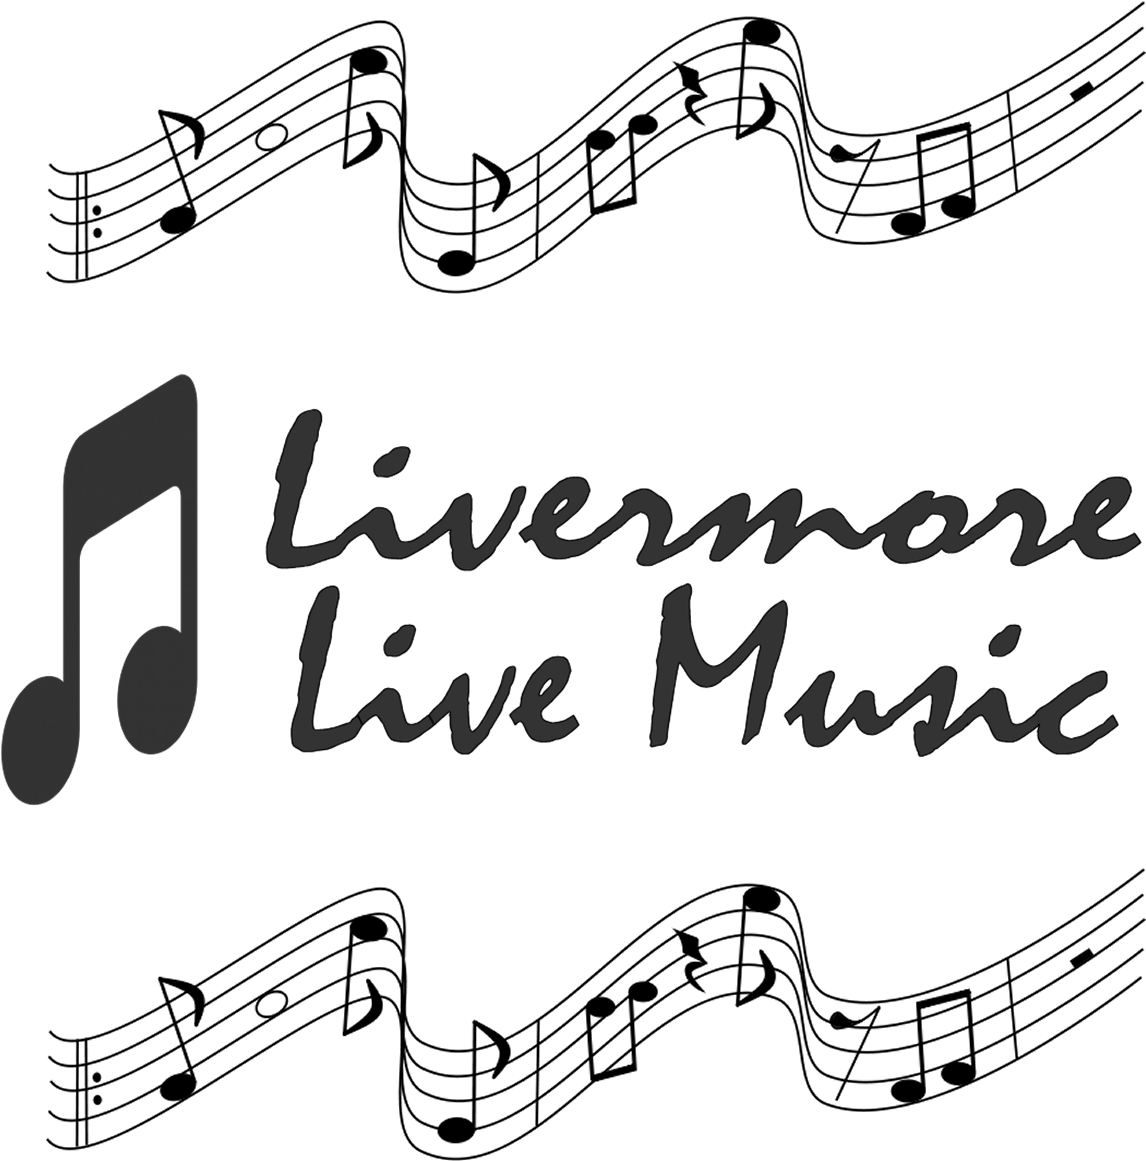 Livermore Live Music Graphic PNG